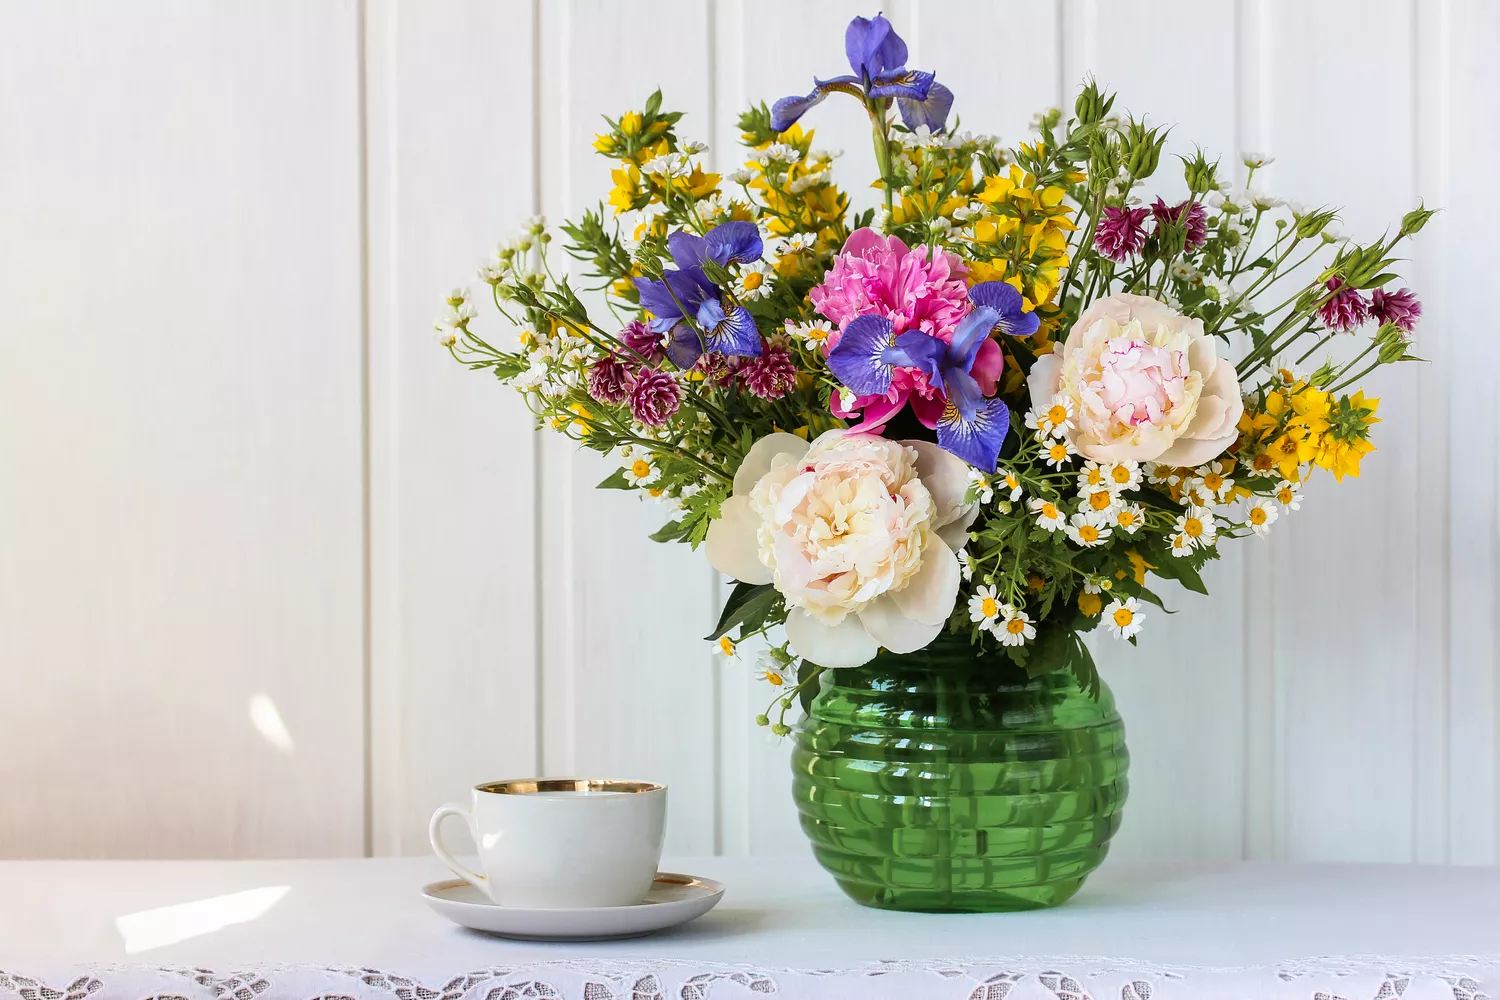 How to Use Floral Mechanics for a Better Bouquet, According to Florists